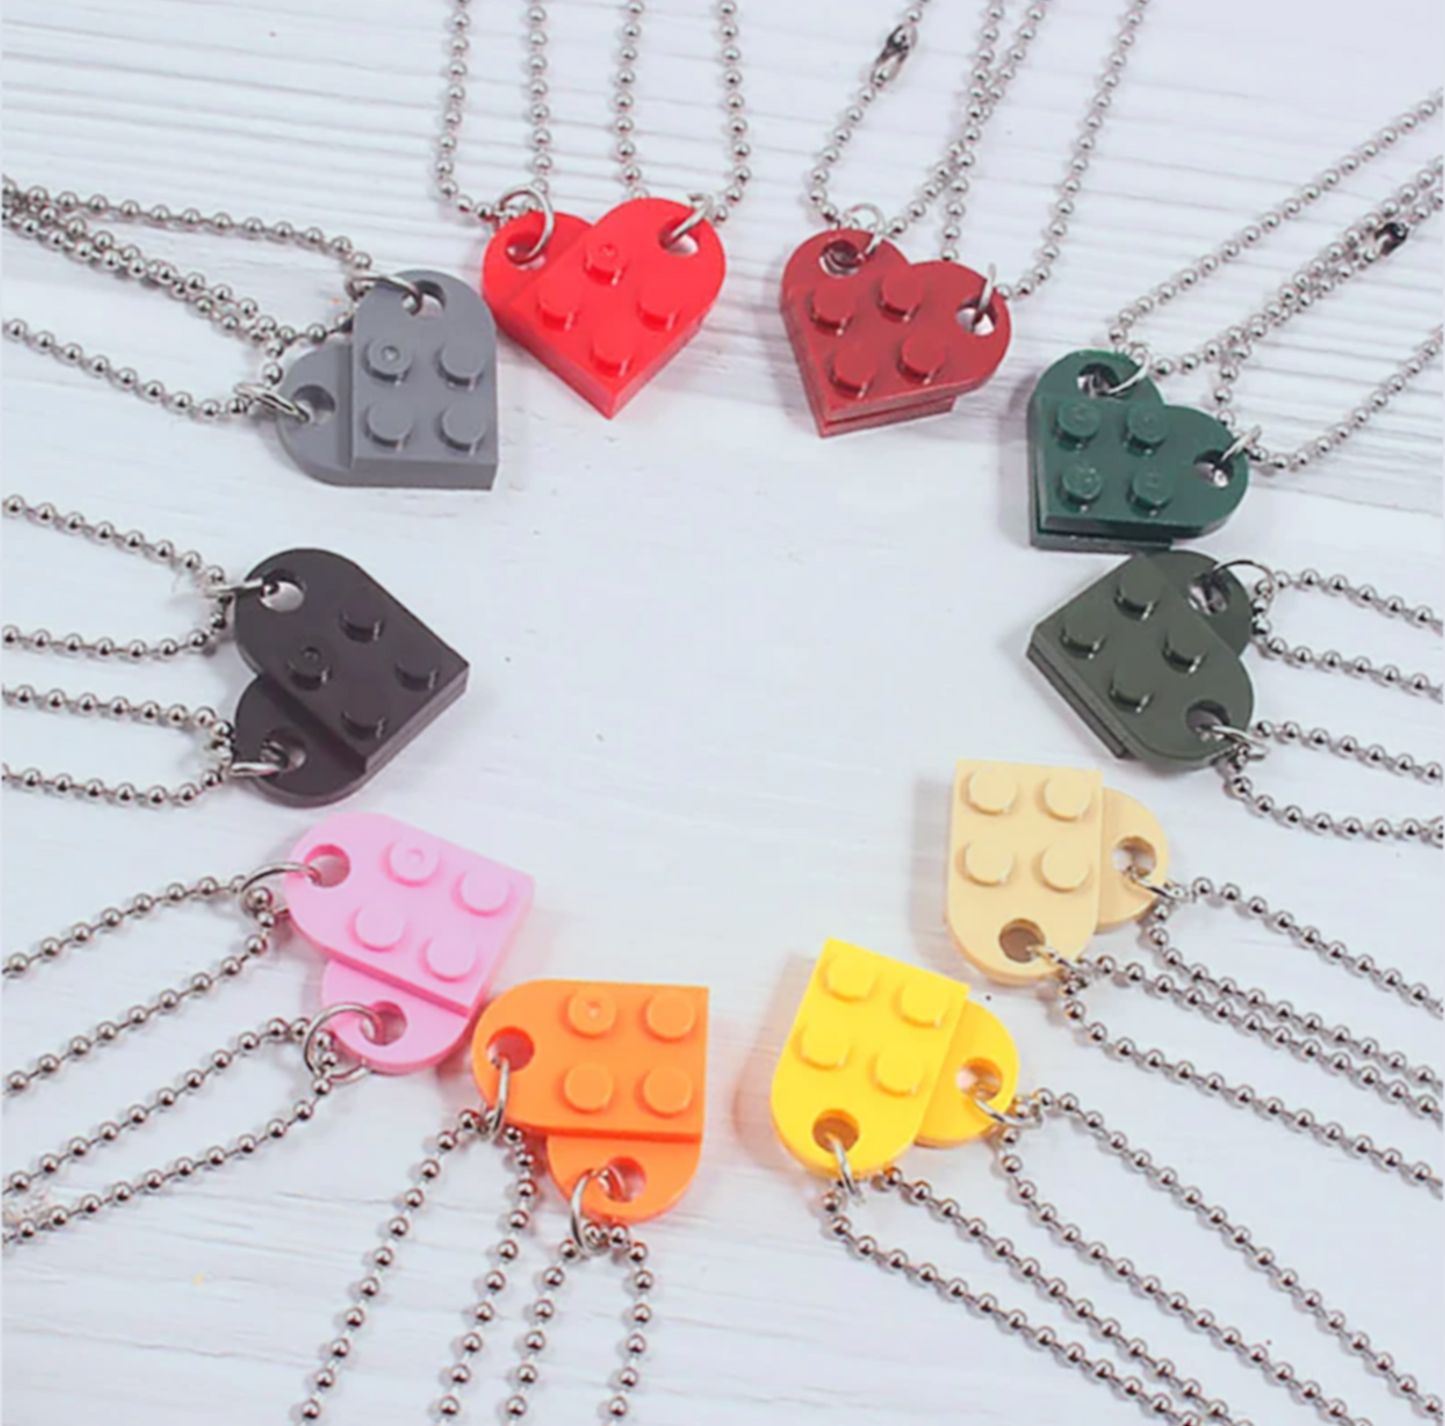 Matching Connecting Brick Necklaces